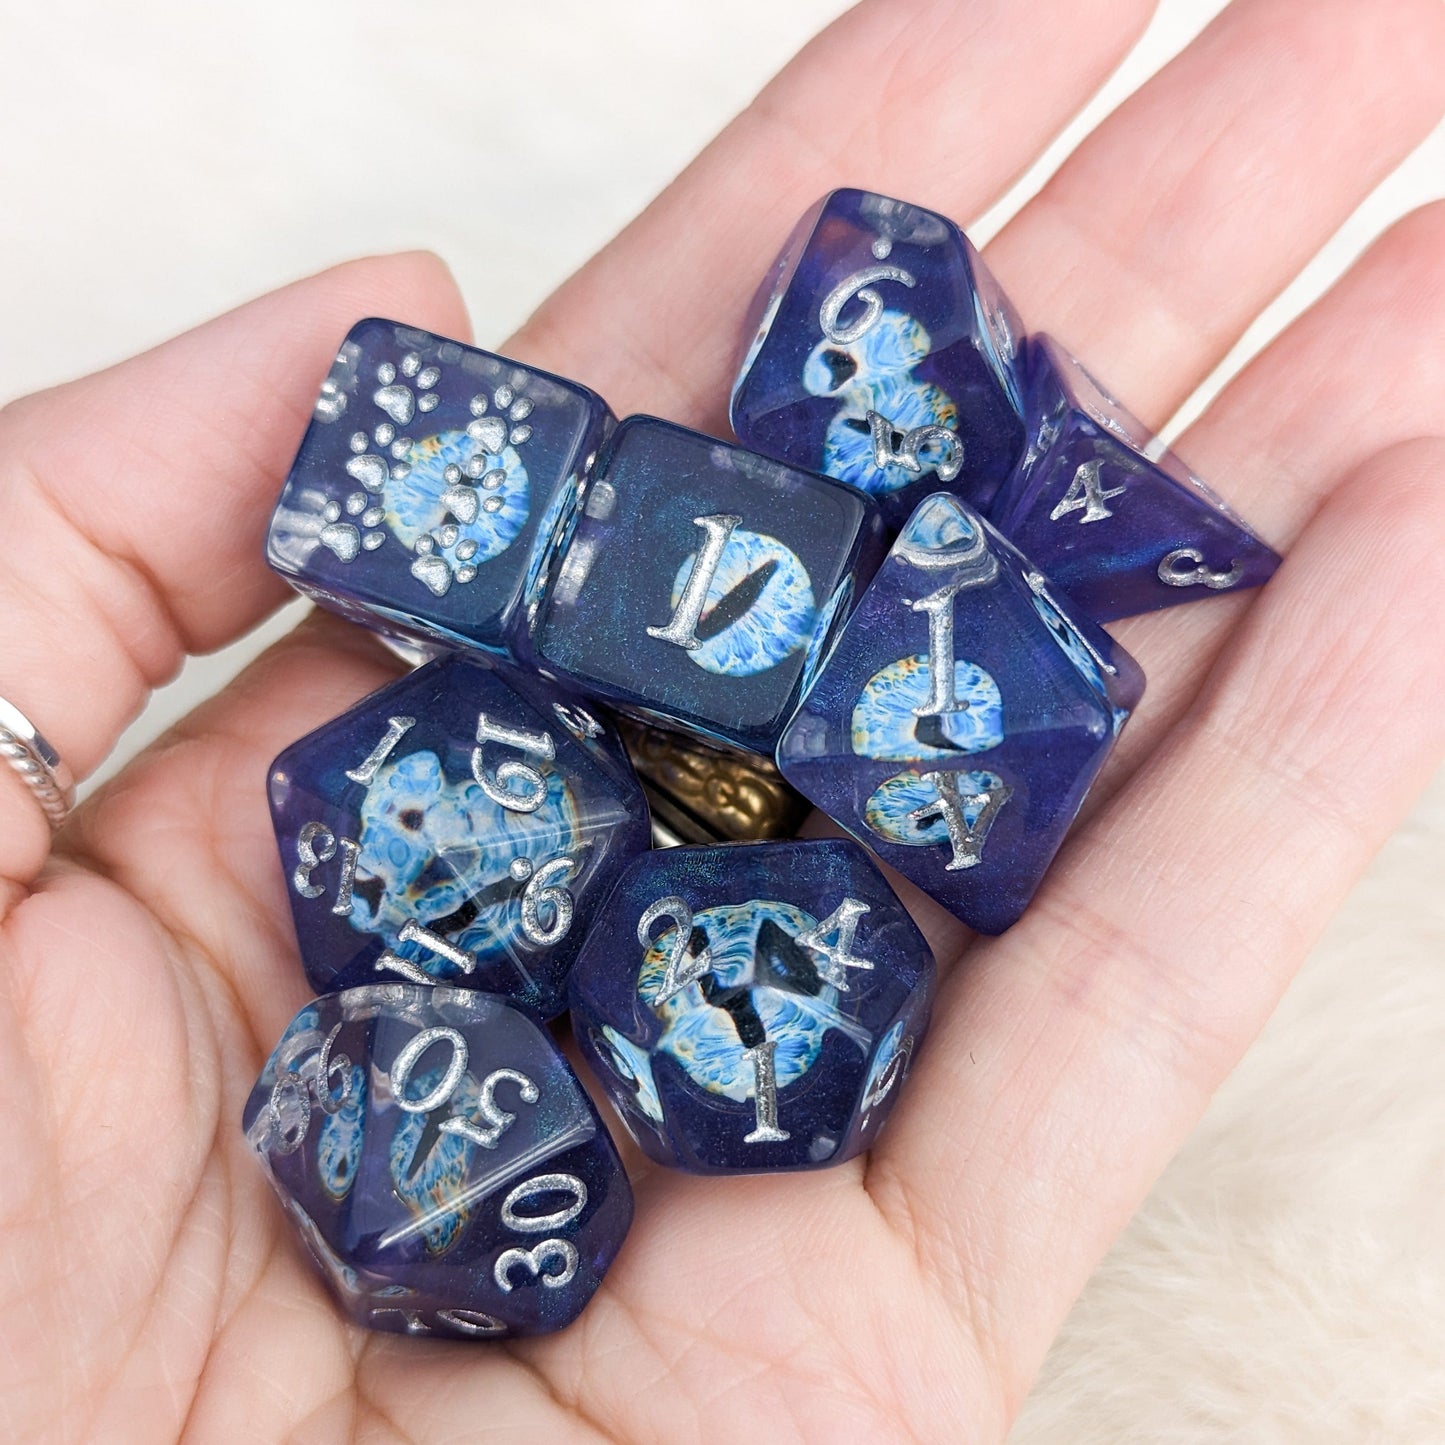 Wall of Eyes 8 piece DND dice set